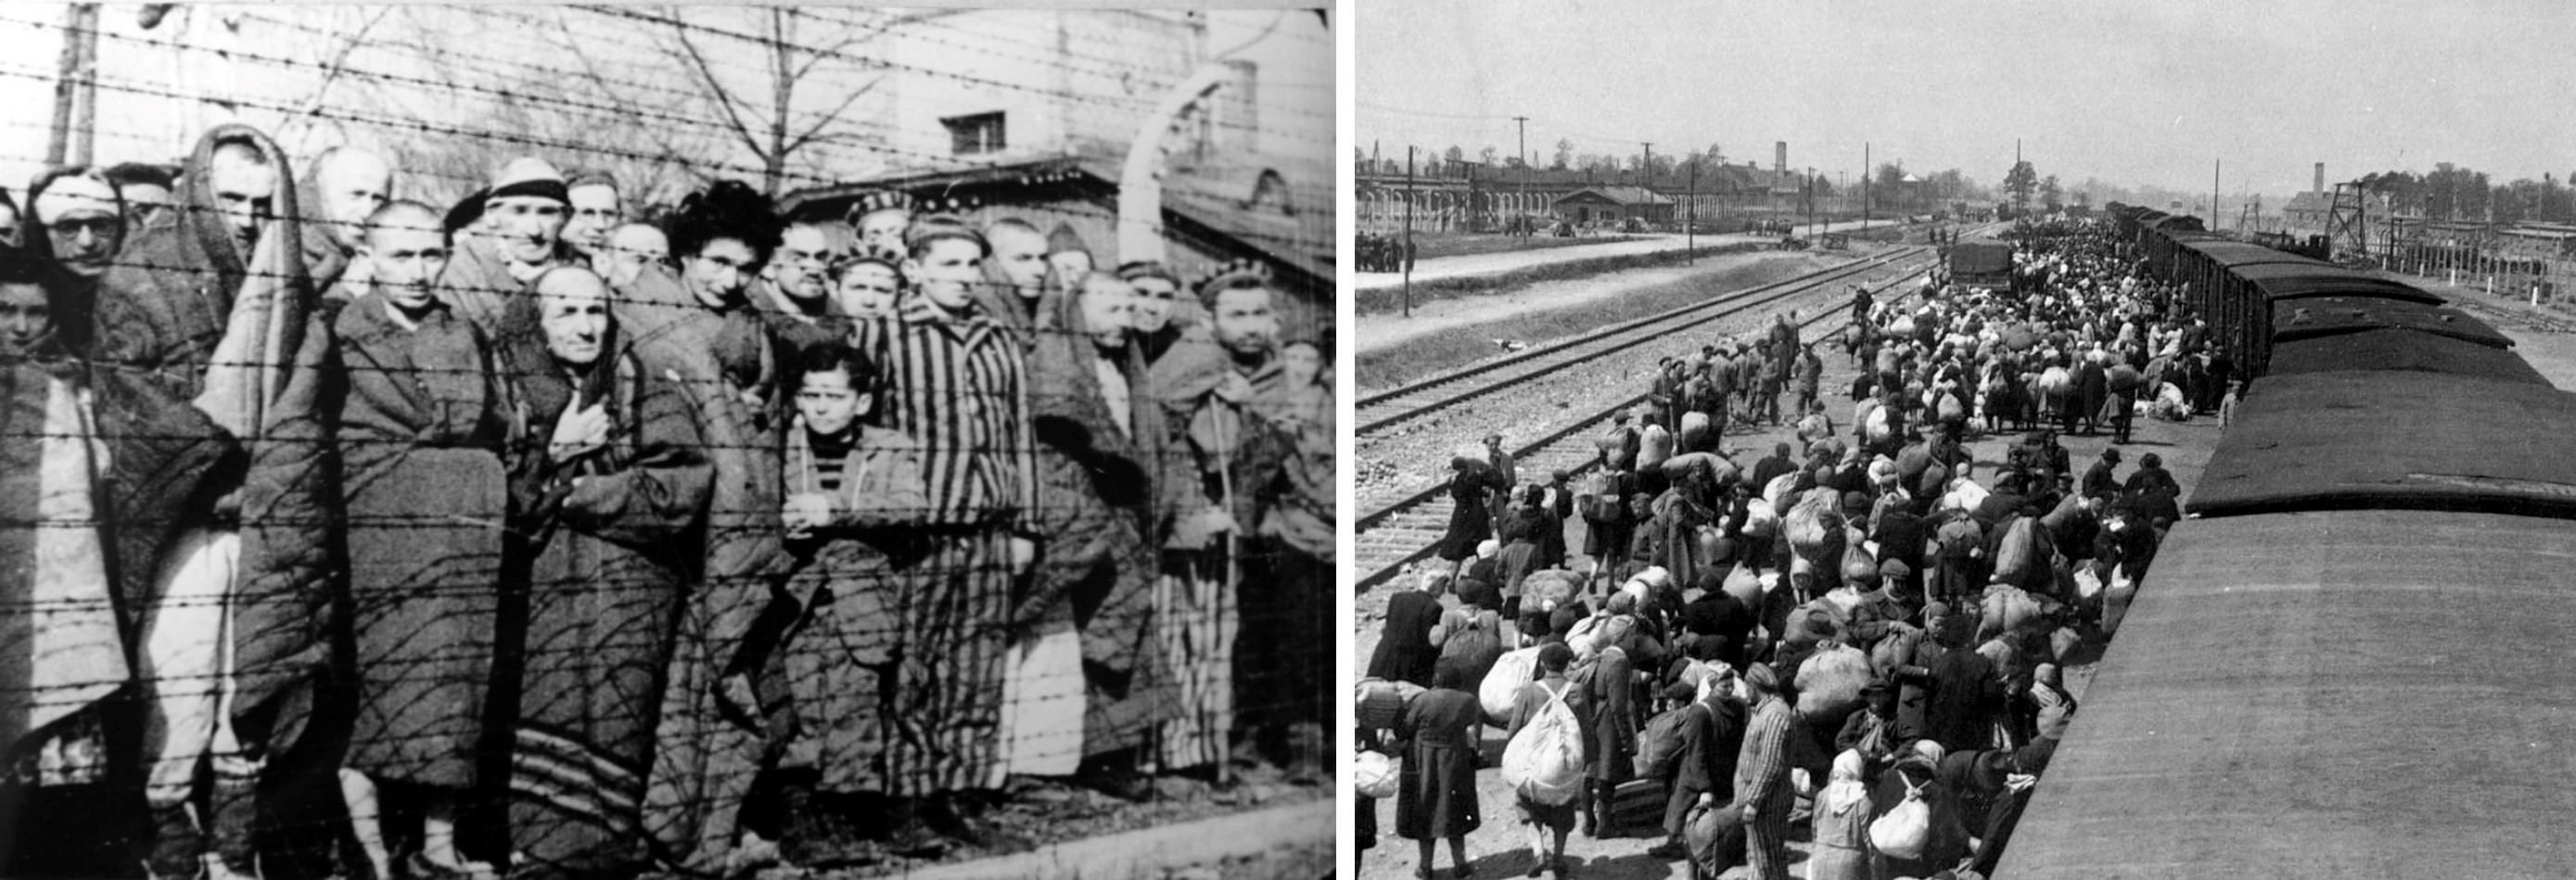 On the left, prisoners at Auschwitz-Birkenau at liberation. On the right, Jews arriving at the camps.